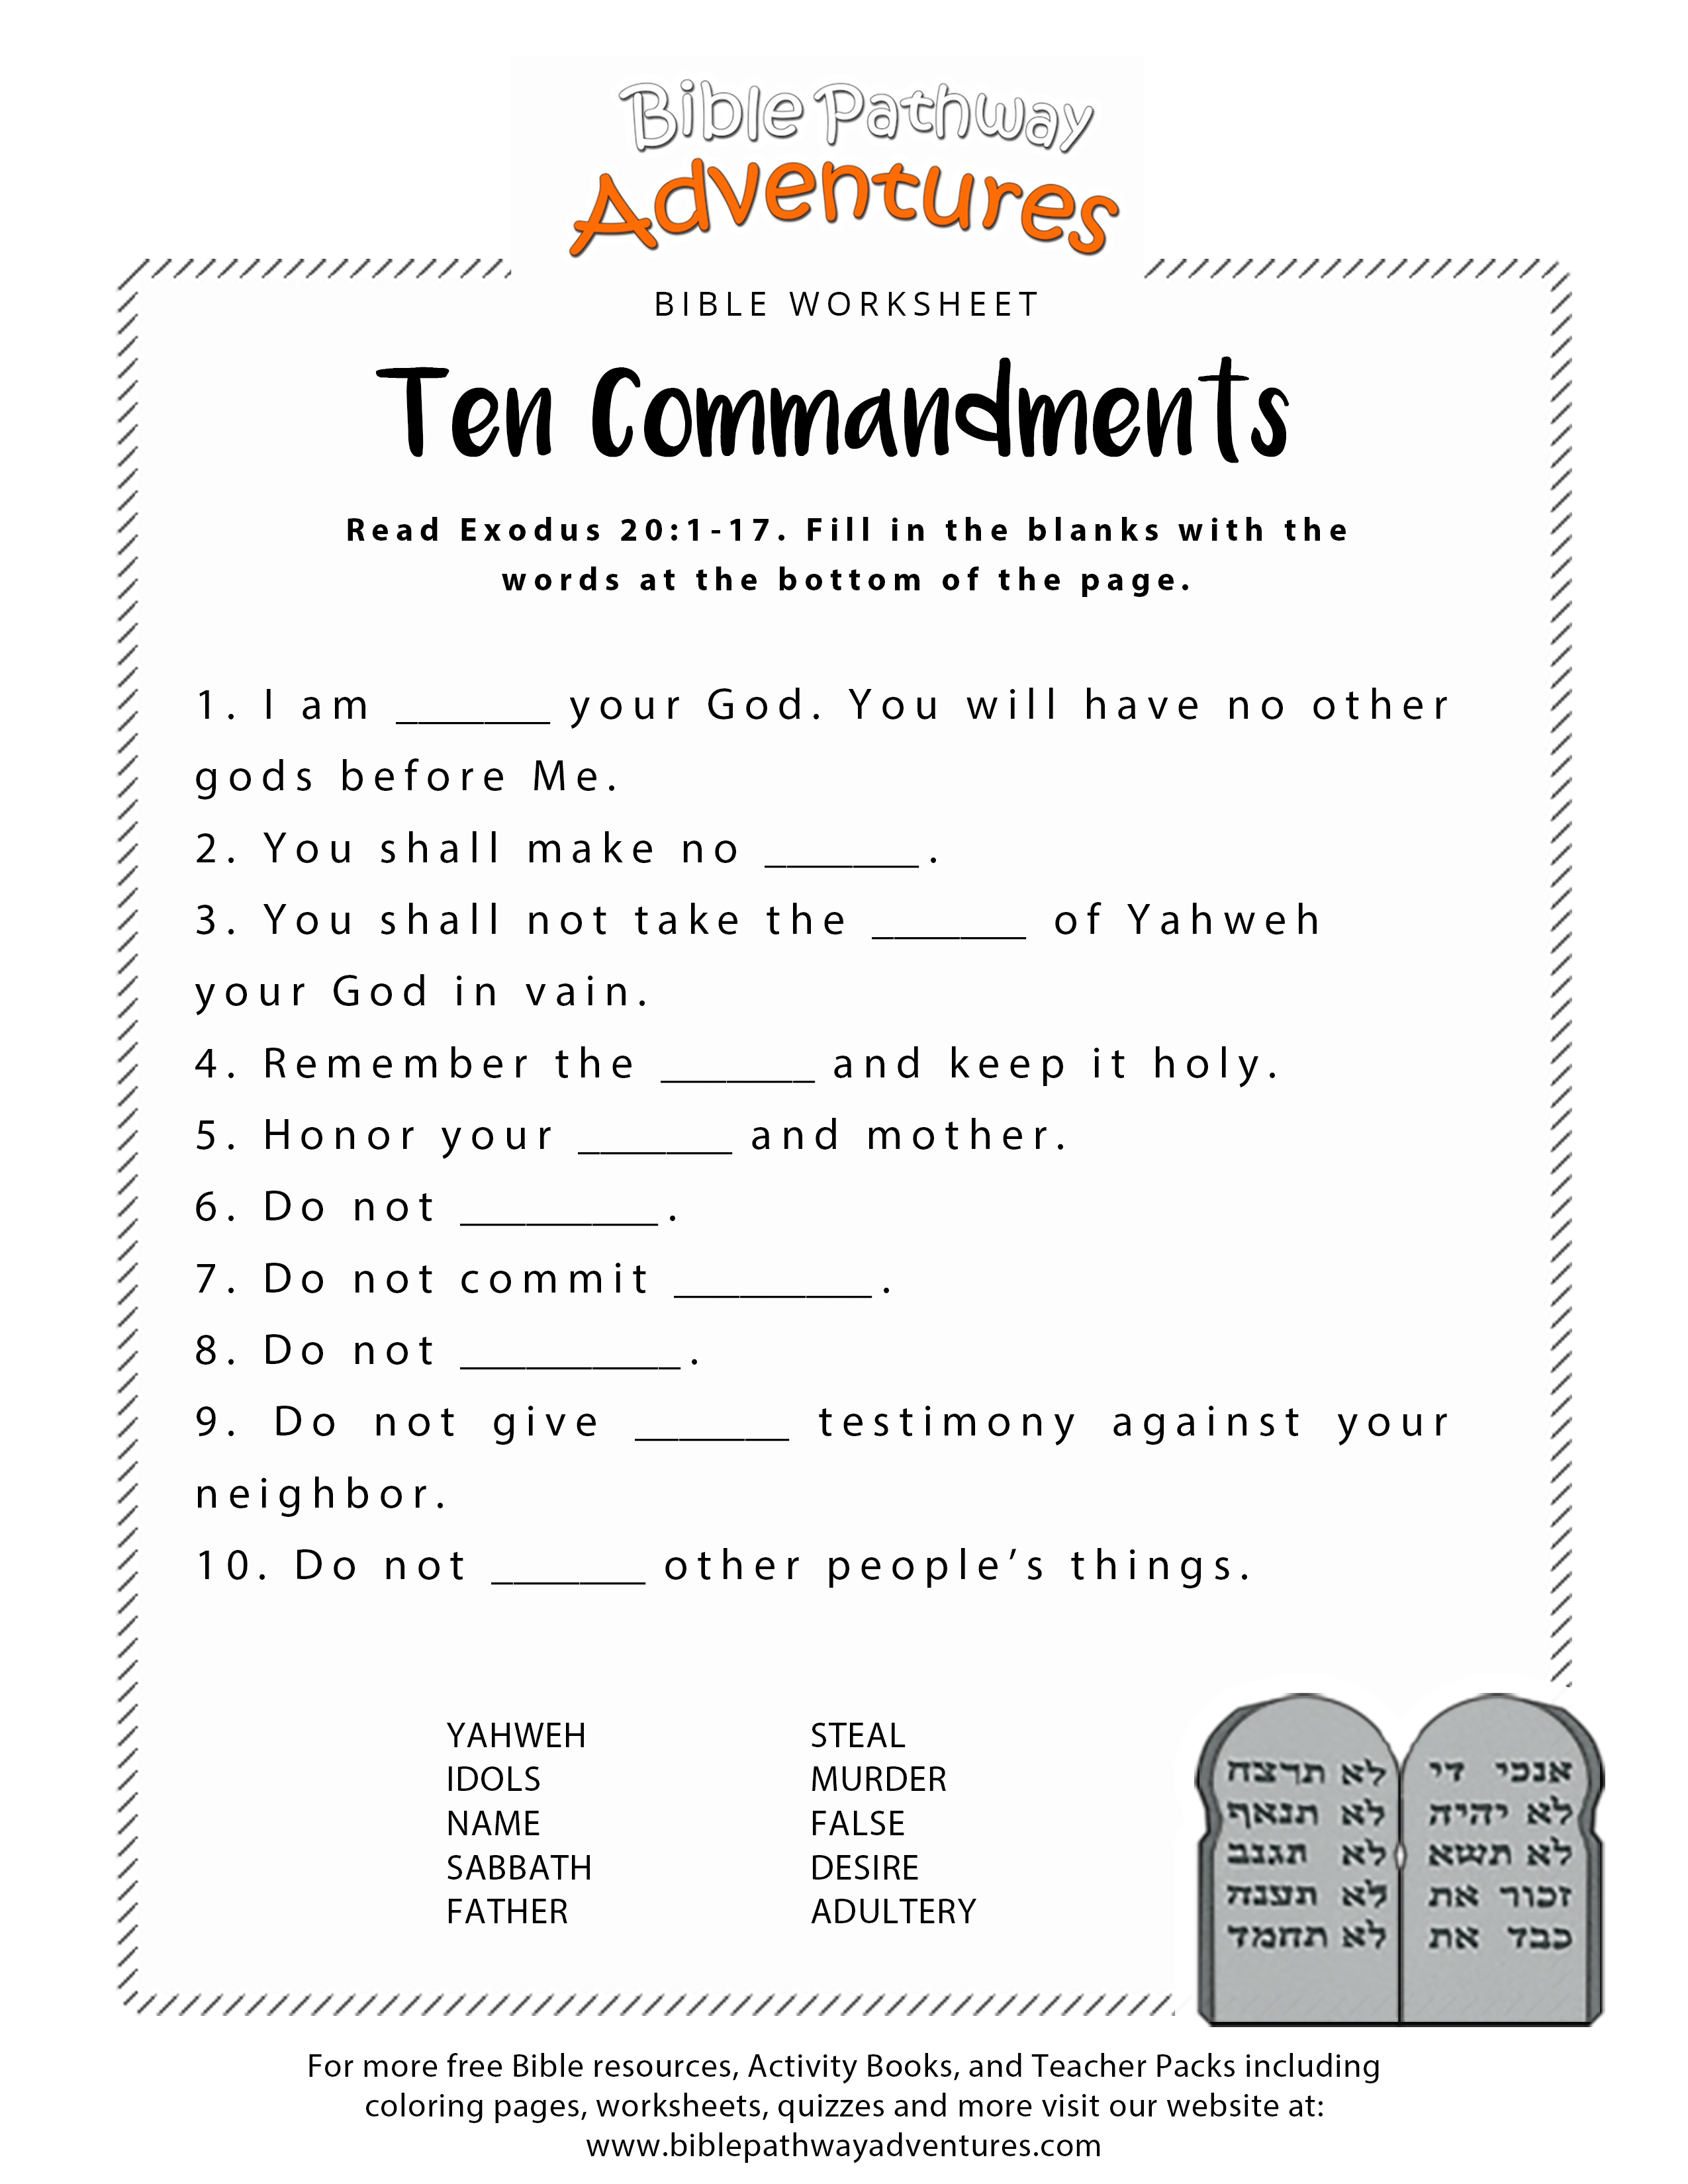 Free Printable Bible Worksheets For Youth – Worksheet Template - Free Printable Bible Study Worksheets